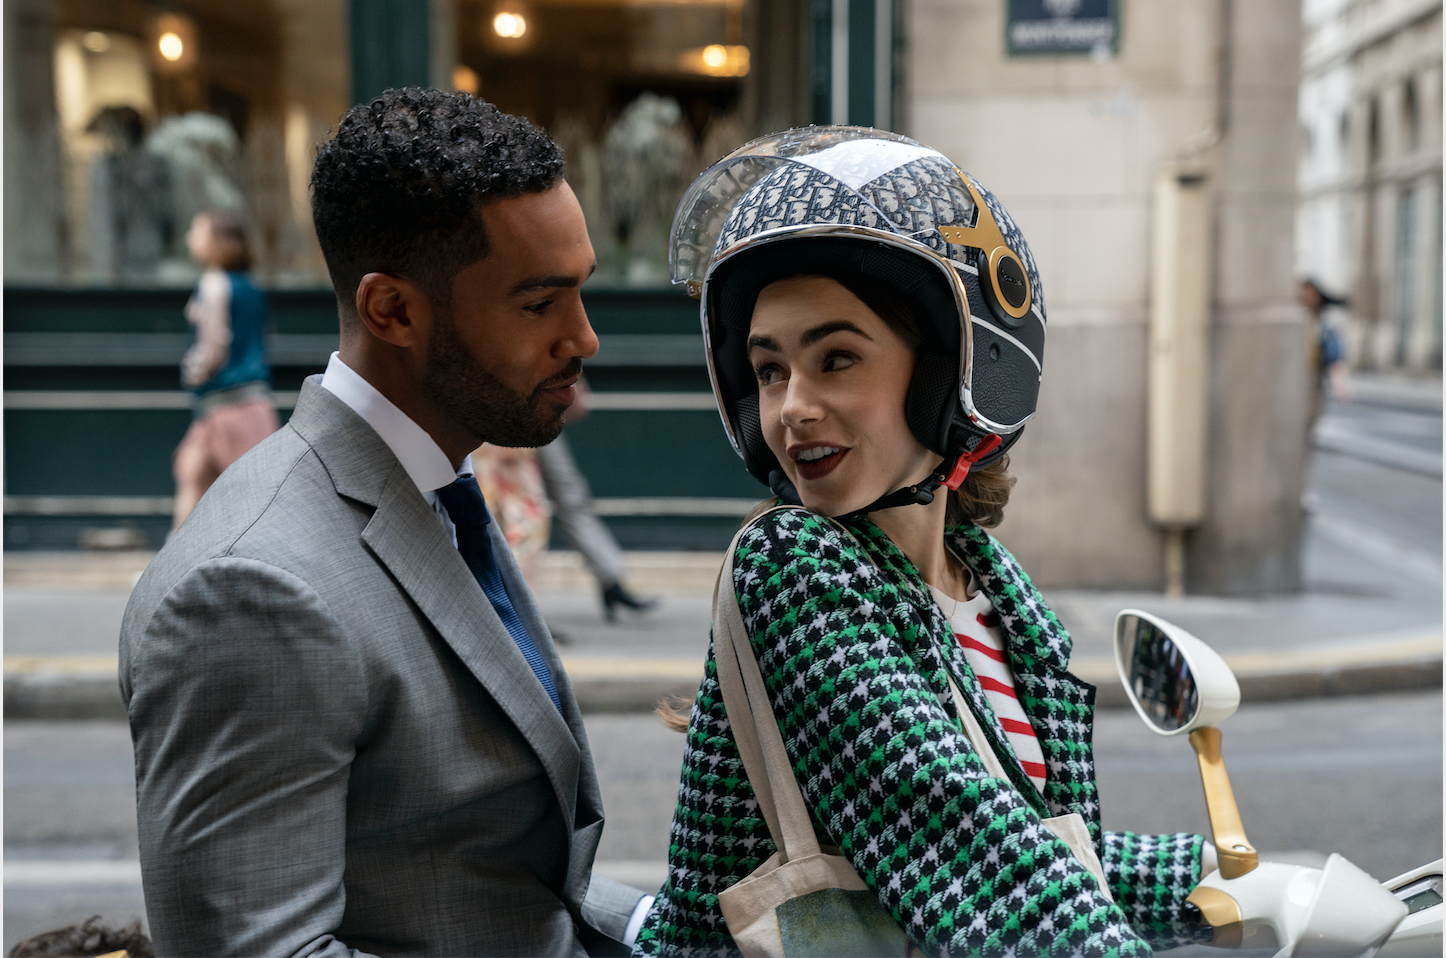 Emily in Paris' Season 4 — Filming Details, Cast, and Everything